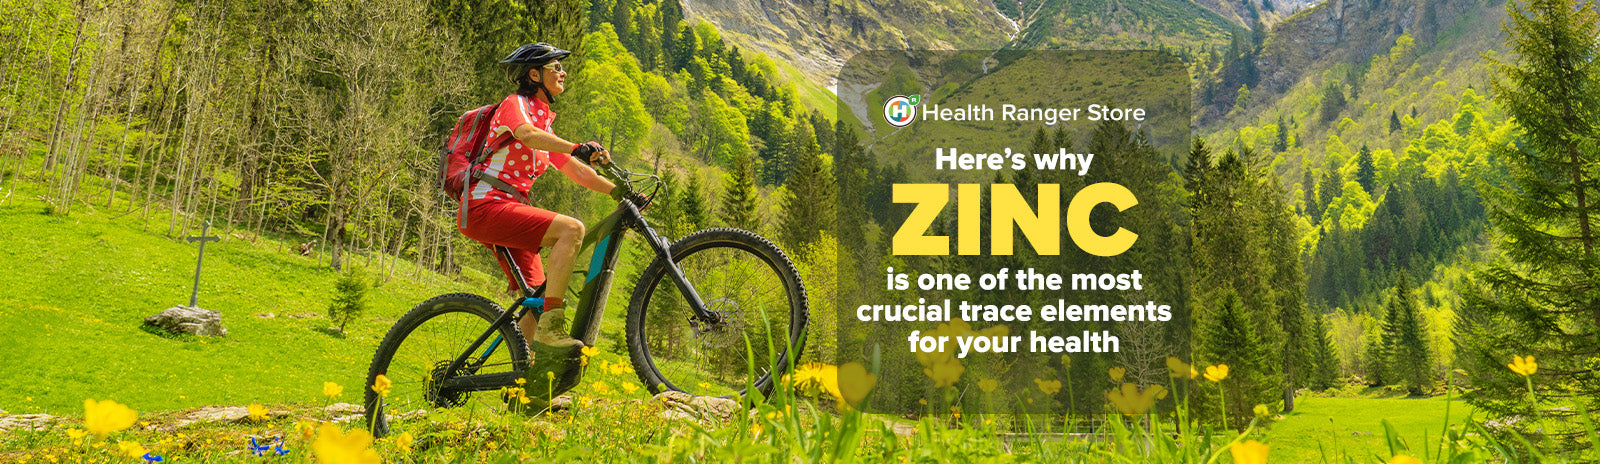 Here’s why Zinc is one of the most crucial trace elements for your health